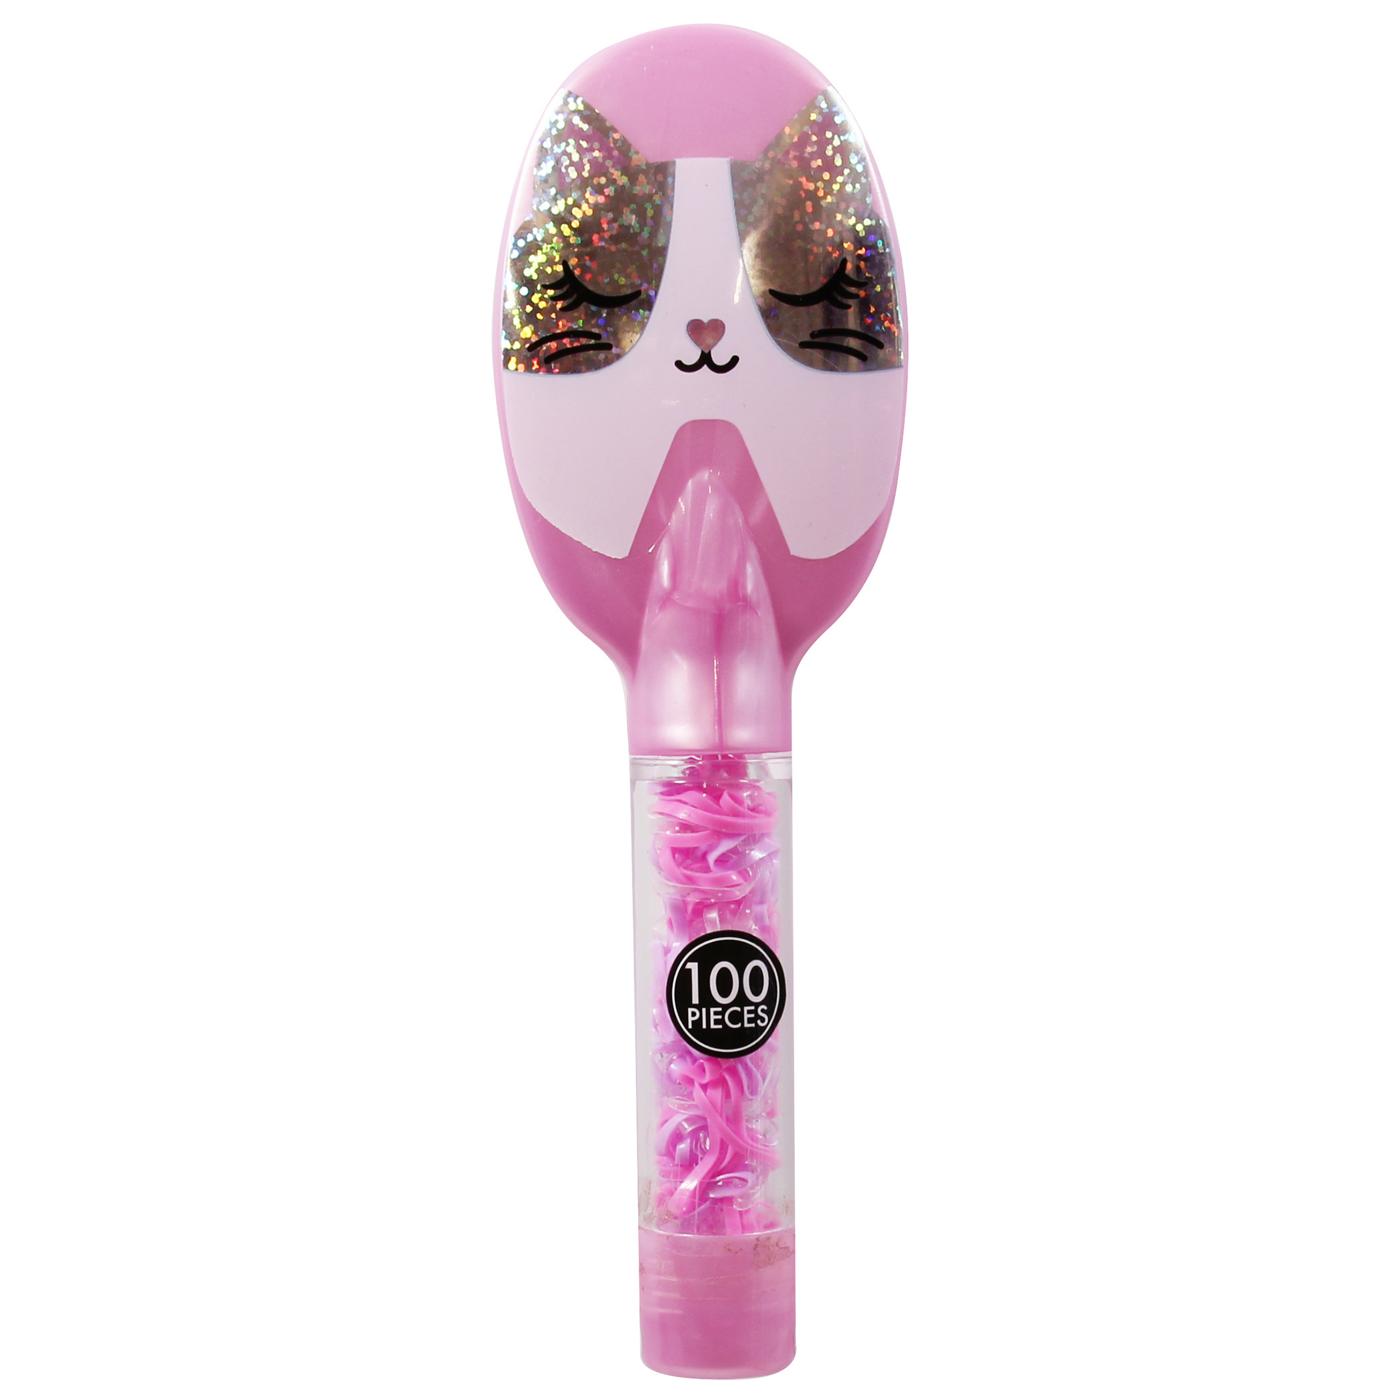 Trend Zone Cat Face Brush with 100 No Snag Hair Elastics; image 1 of 2